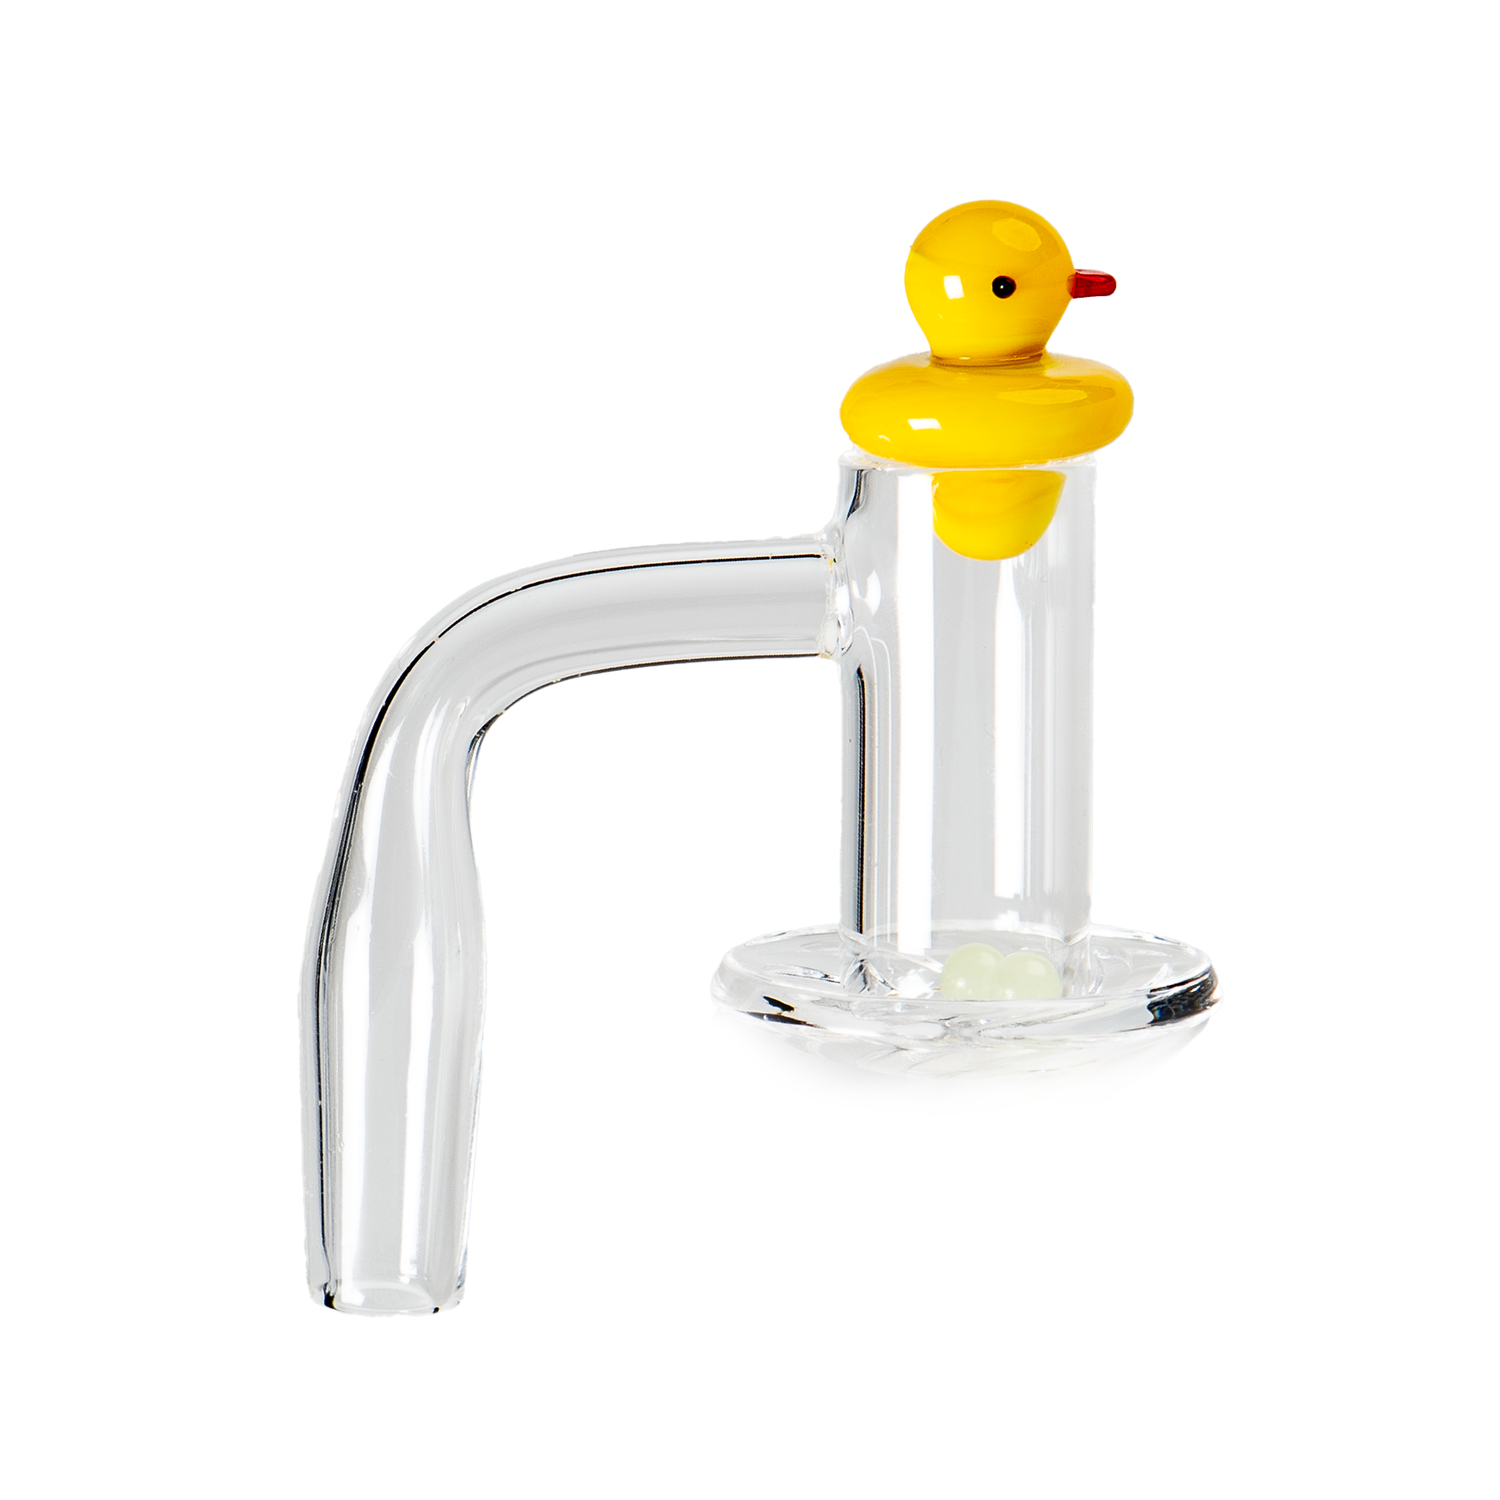 Male Terp Blender With Duck Cap